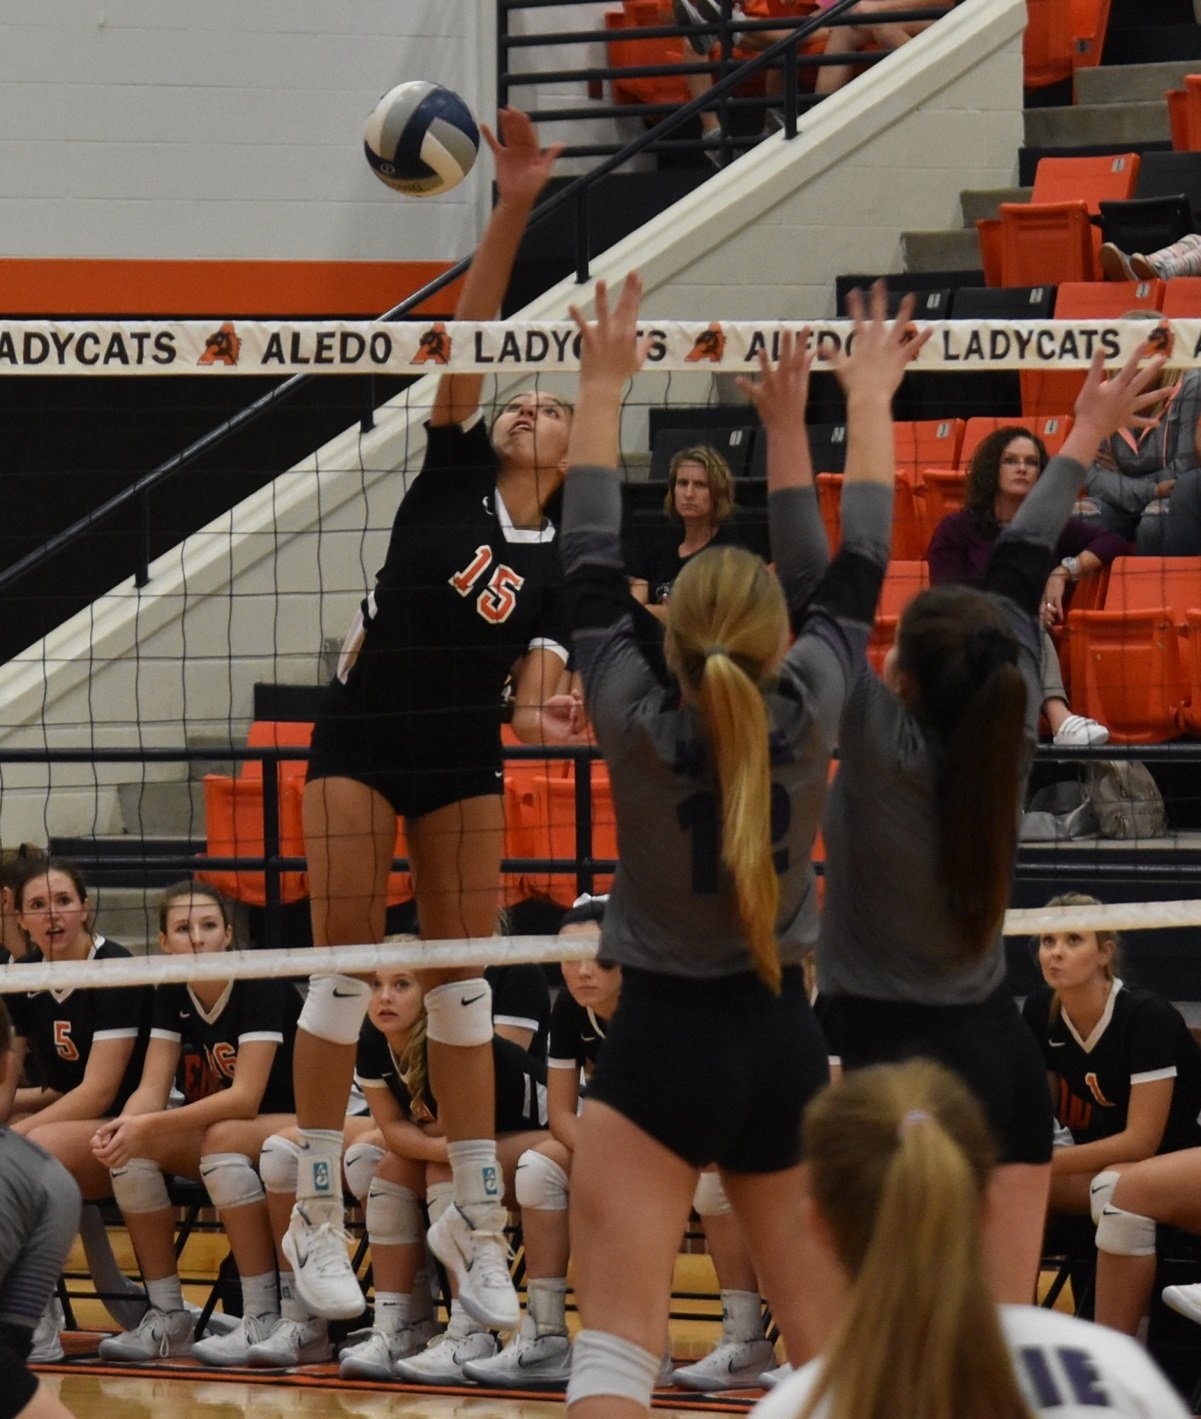 Aledo hitter Evelyn Torres sends down one of her match-high 12 kills during the Ladycats' sweep of Abilene Wylie in the District 4-5A volleyball opener Friday at the Aledo High School gym. Photo by Tony Eierdam